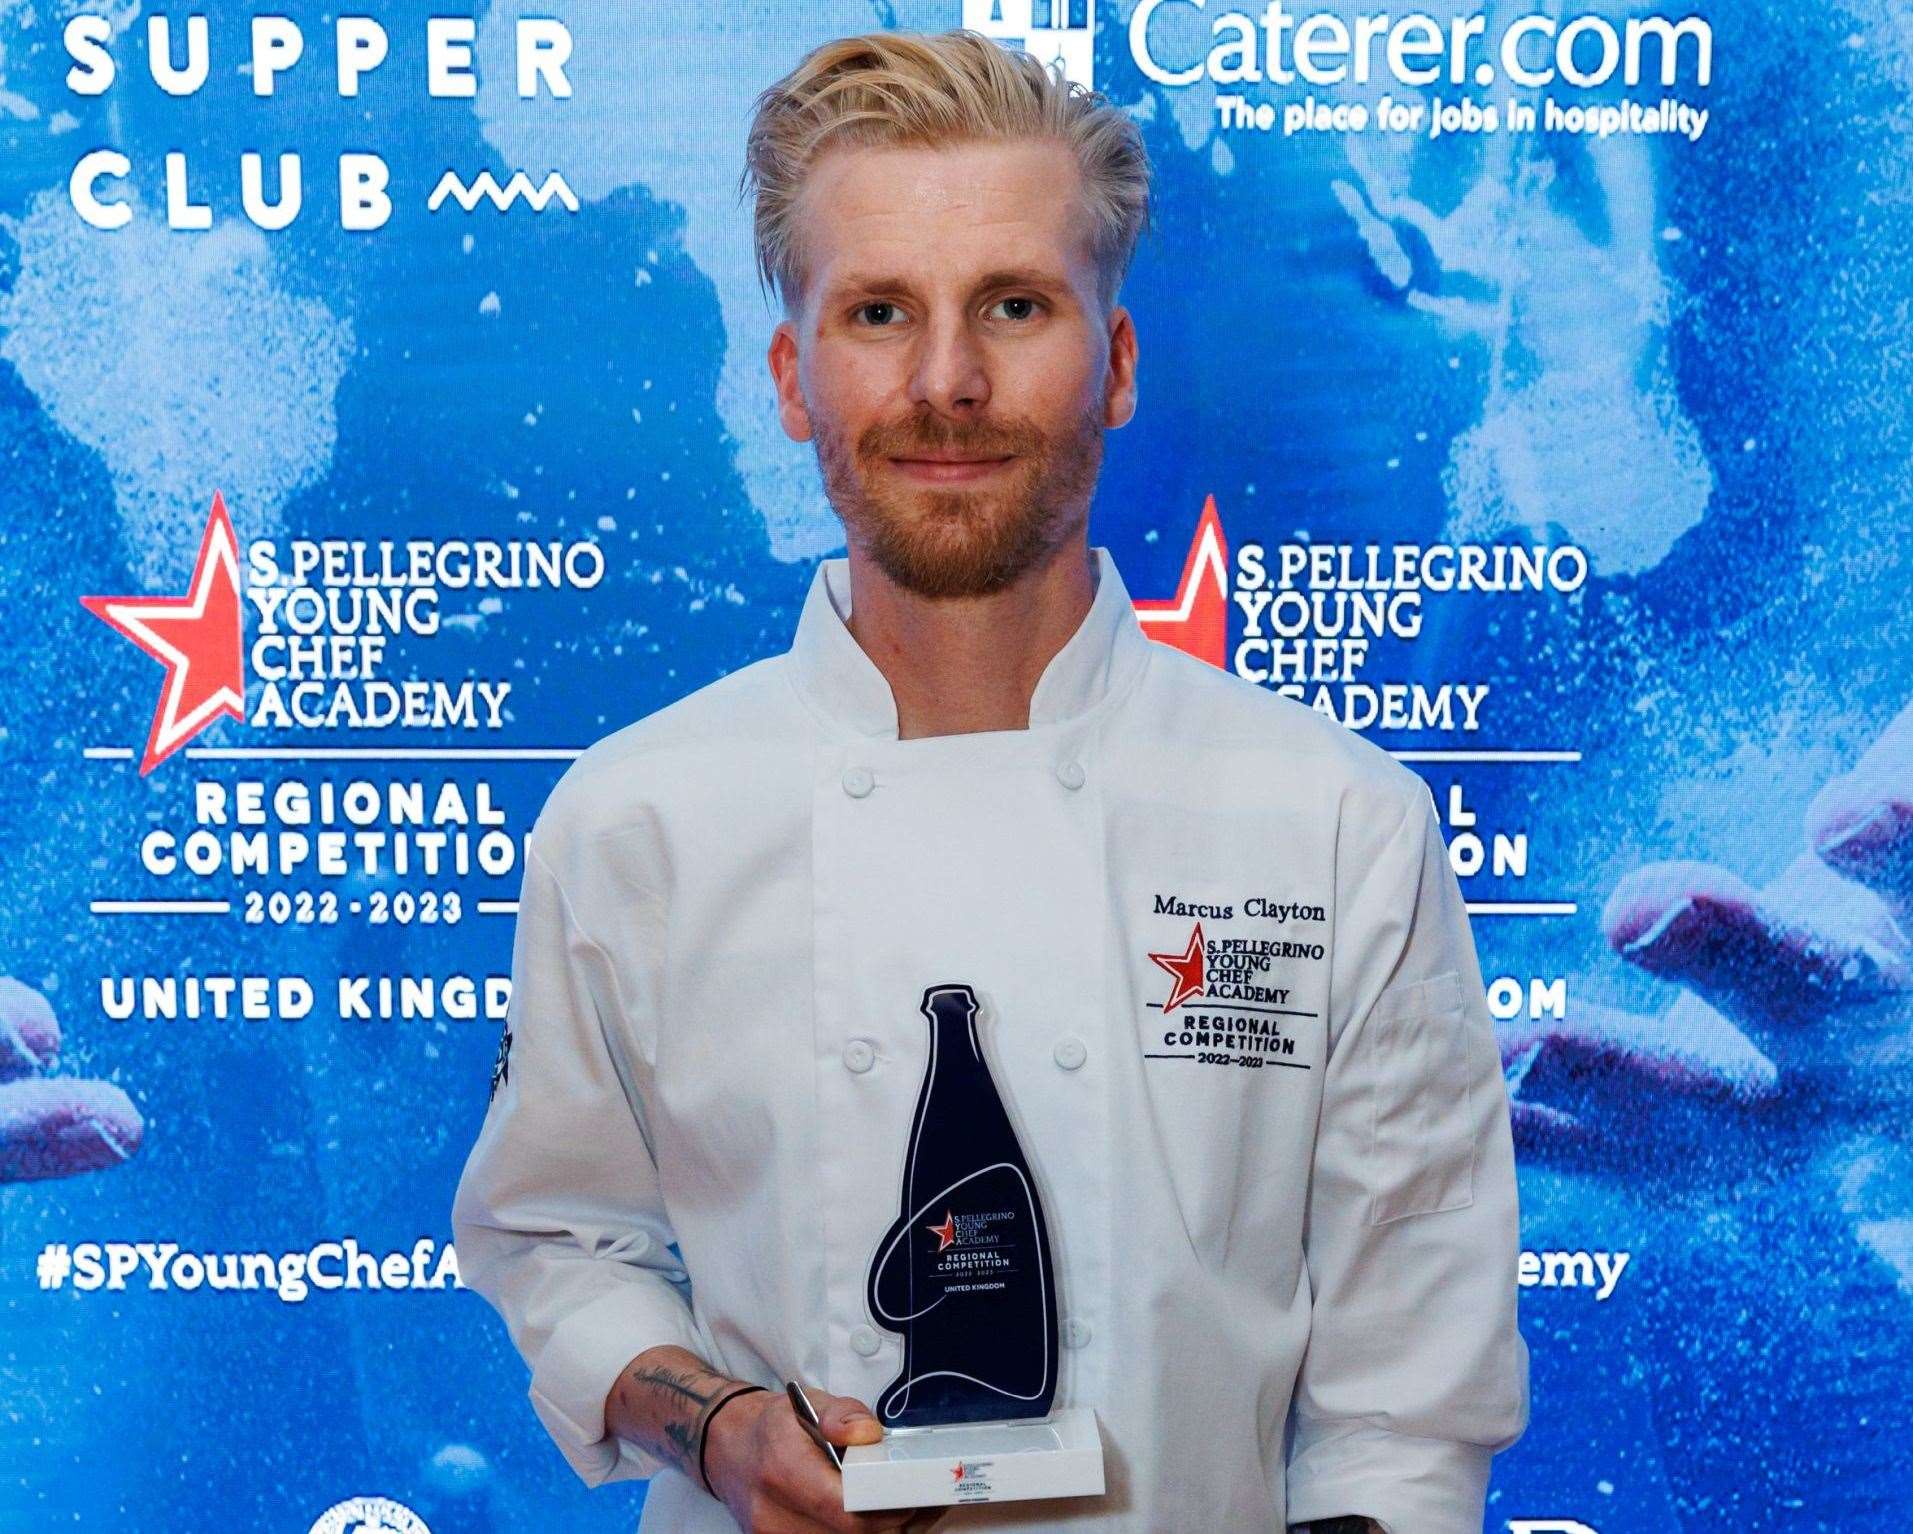 Marcus Clayton from the Hide and Fox restaurant in Saltwood will represent the UK at the finals of the S.Pellegrino Young Chef Academy Competition